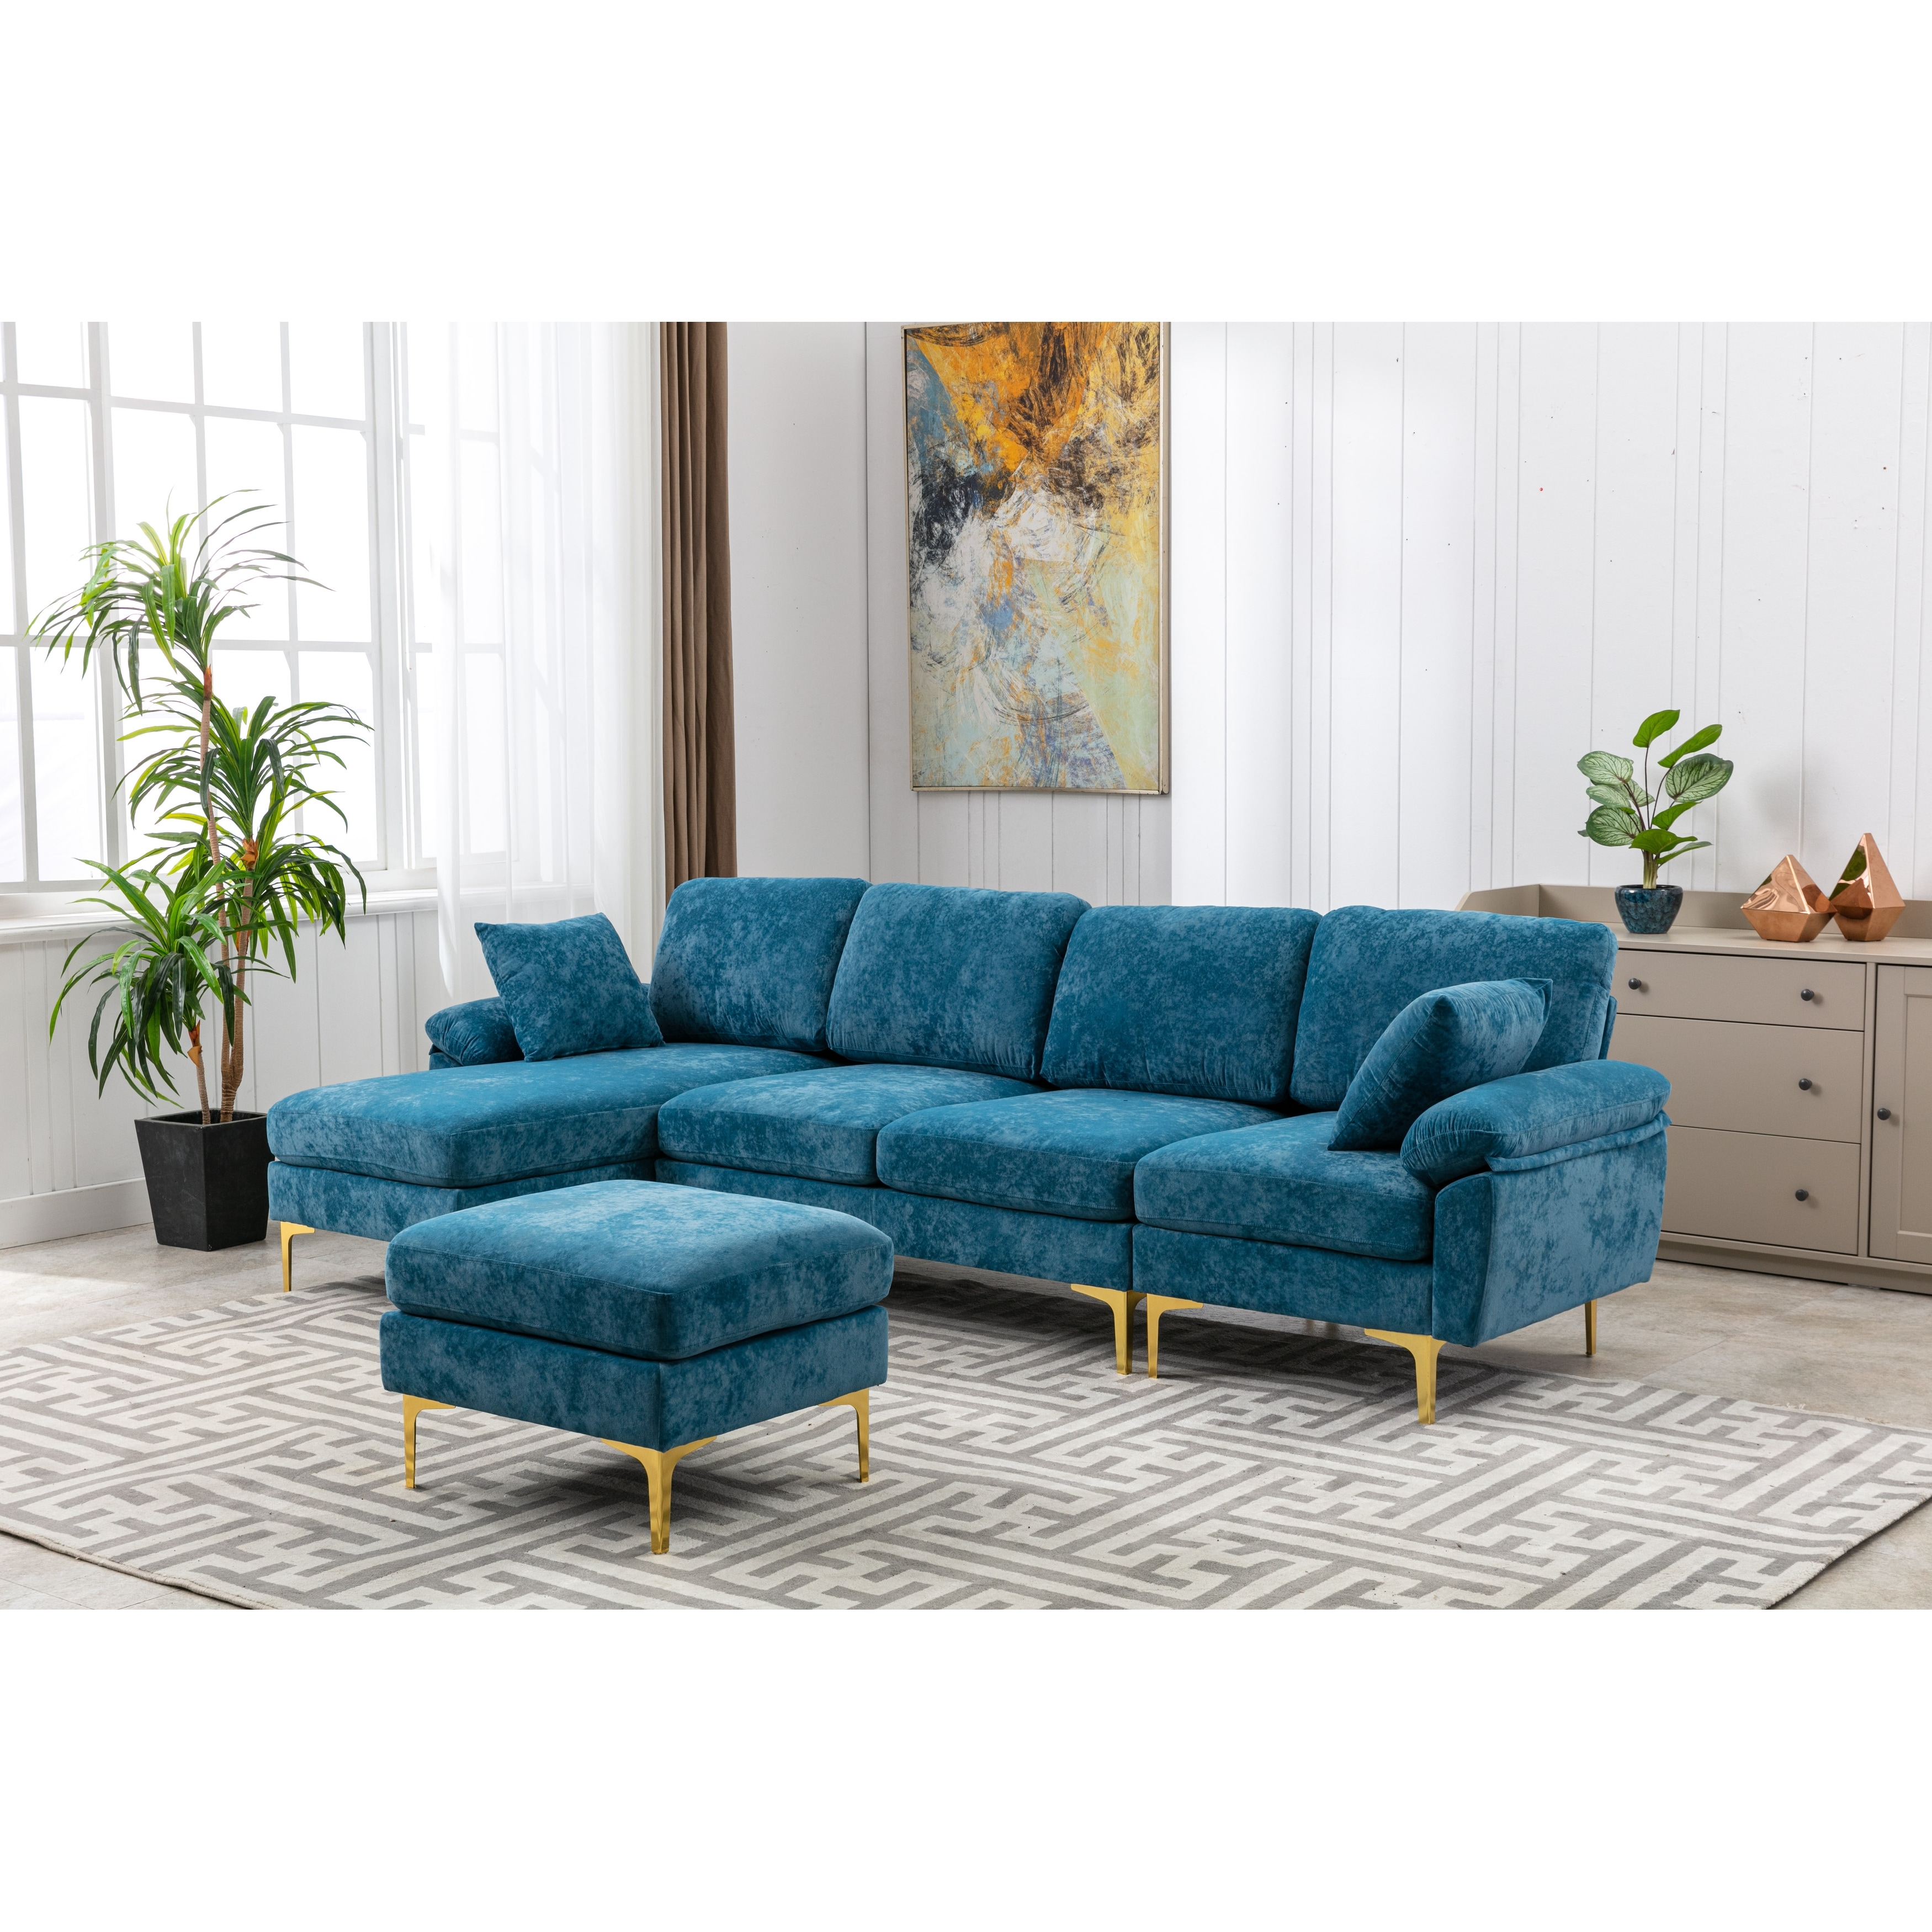 Accent Sofa /Living Room Sofa Sectional Sofa Metal Legs And Poly Fabric Upholstery,seat Fill Material Foam,frame Plywood